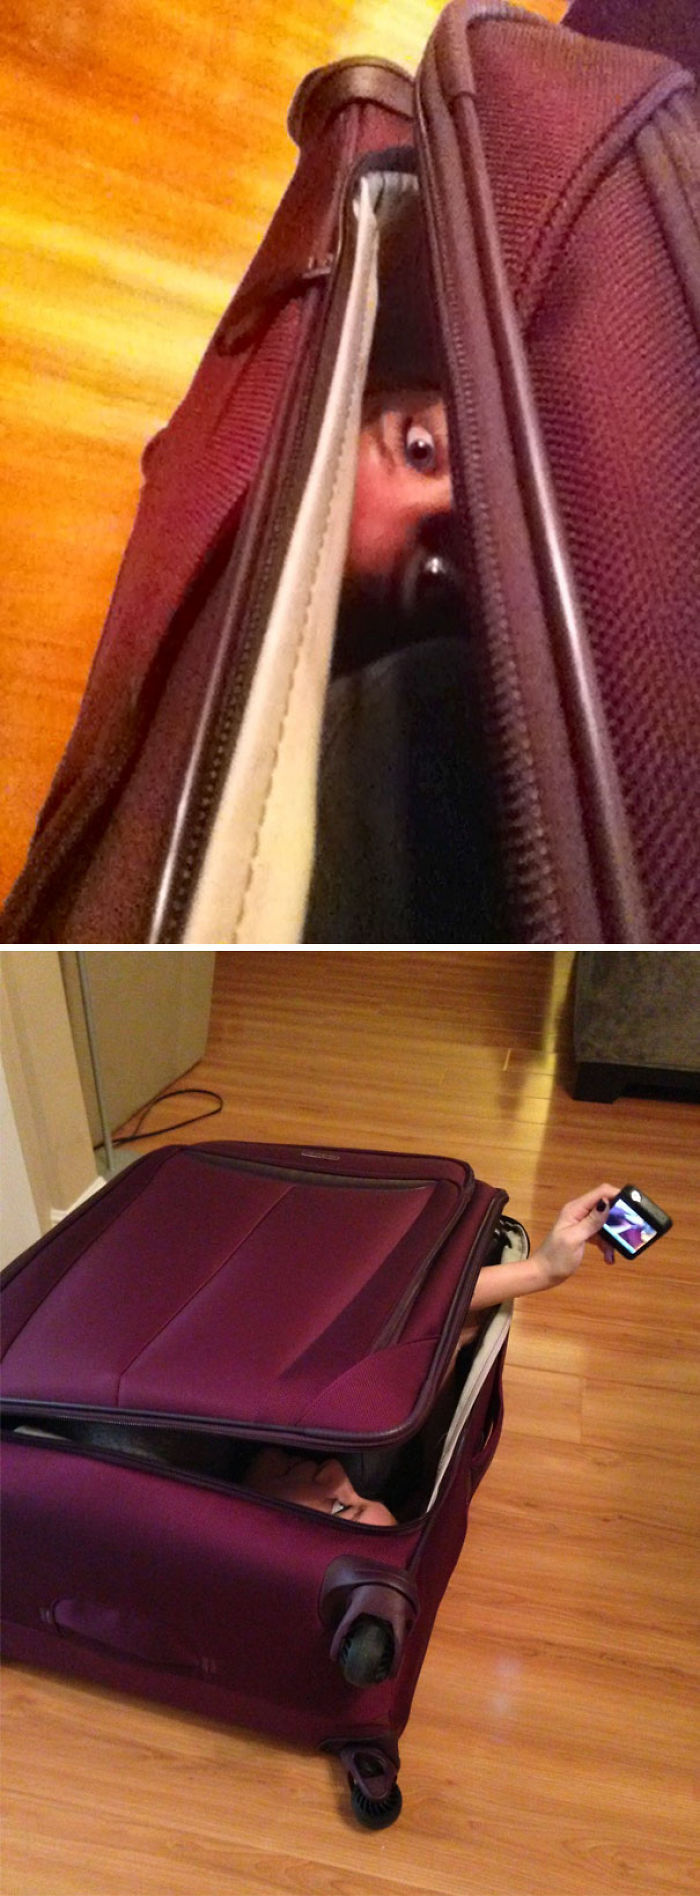 My Husband Challenged Me To See If I Could Fit In My New Suitcase... I Sent Him This Response